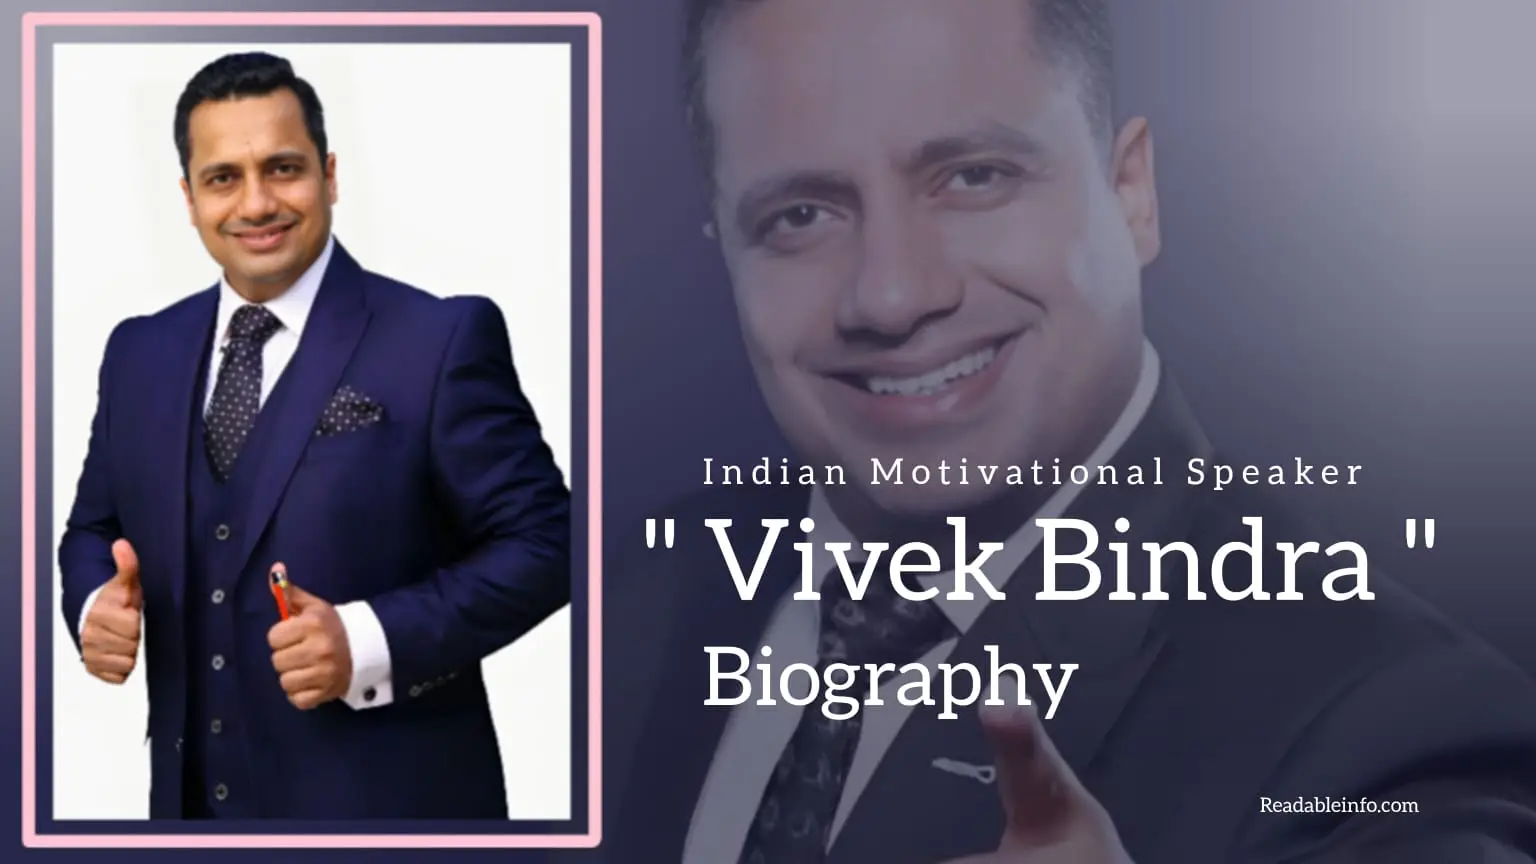 You are currently viewing Vivek Bindra Biography (Indian Motivational Speaker)